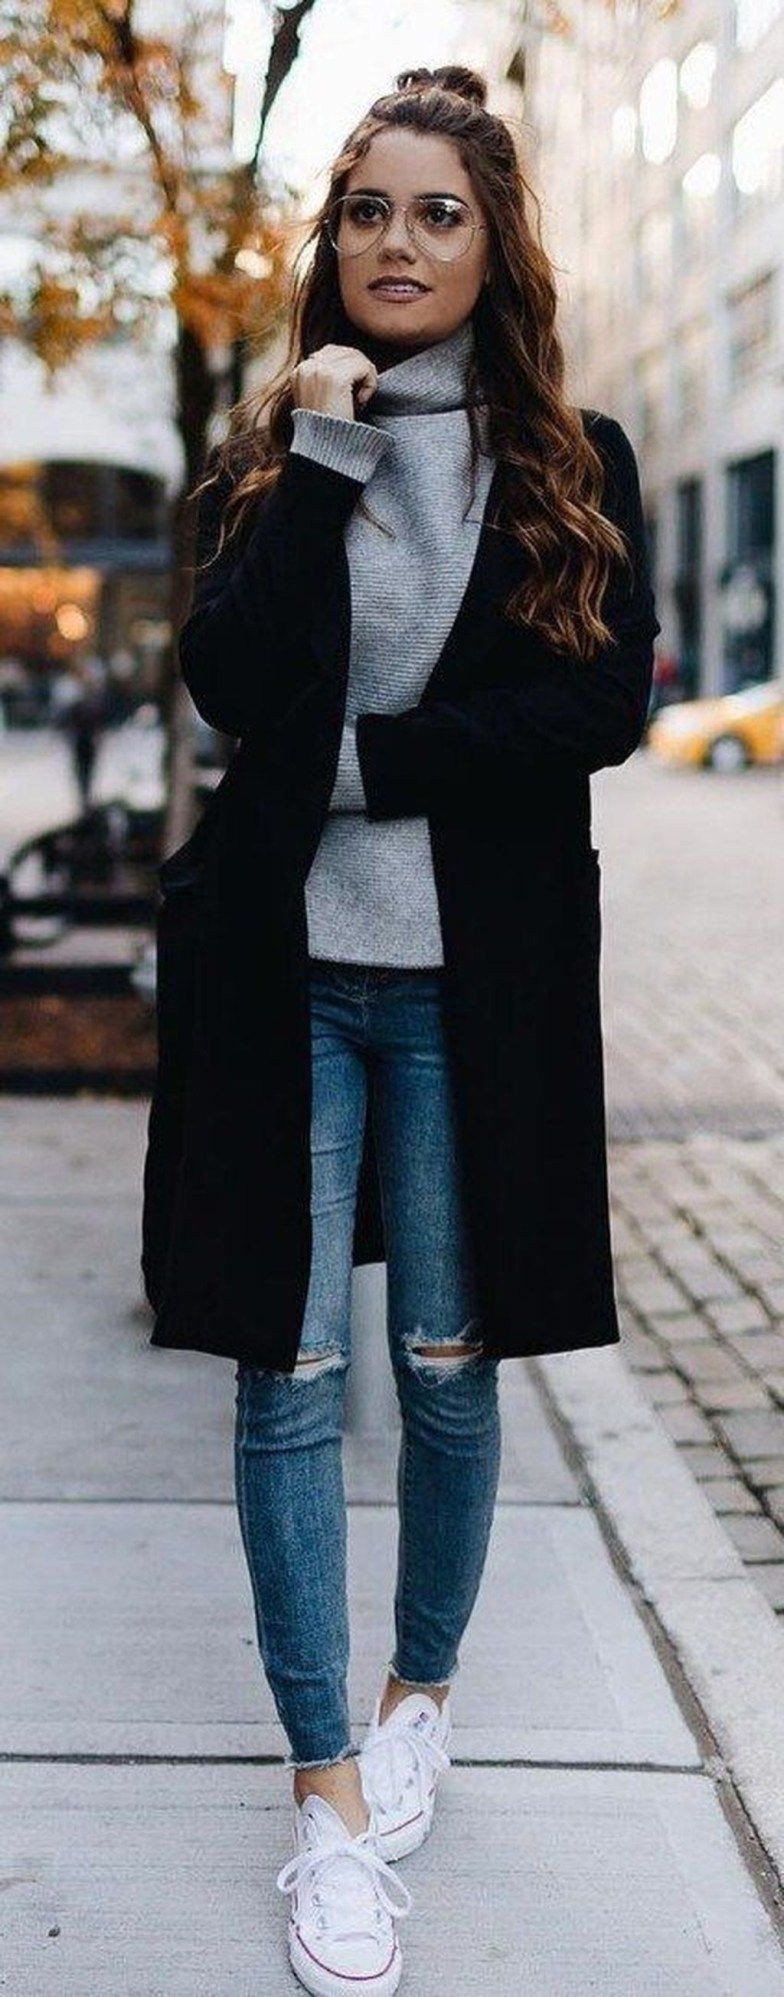 Casual Winter Outfit Ideas
 Best casual winter outfit ideas 2018 for women 26